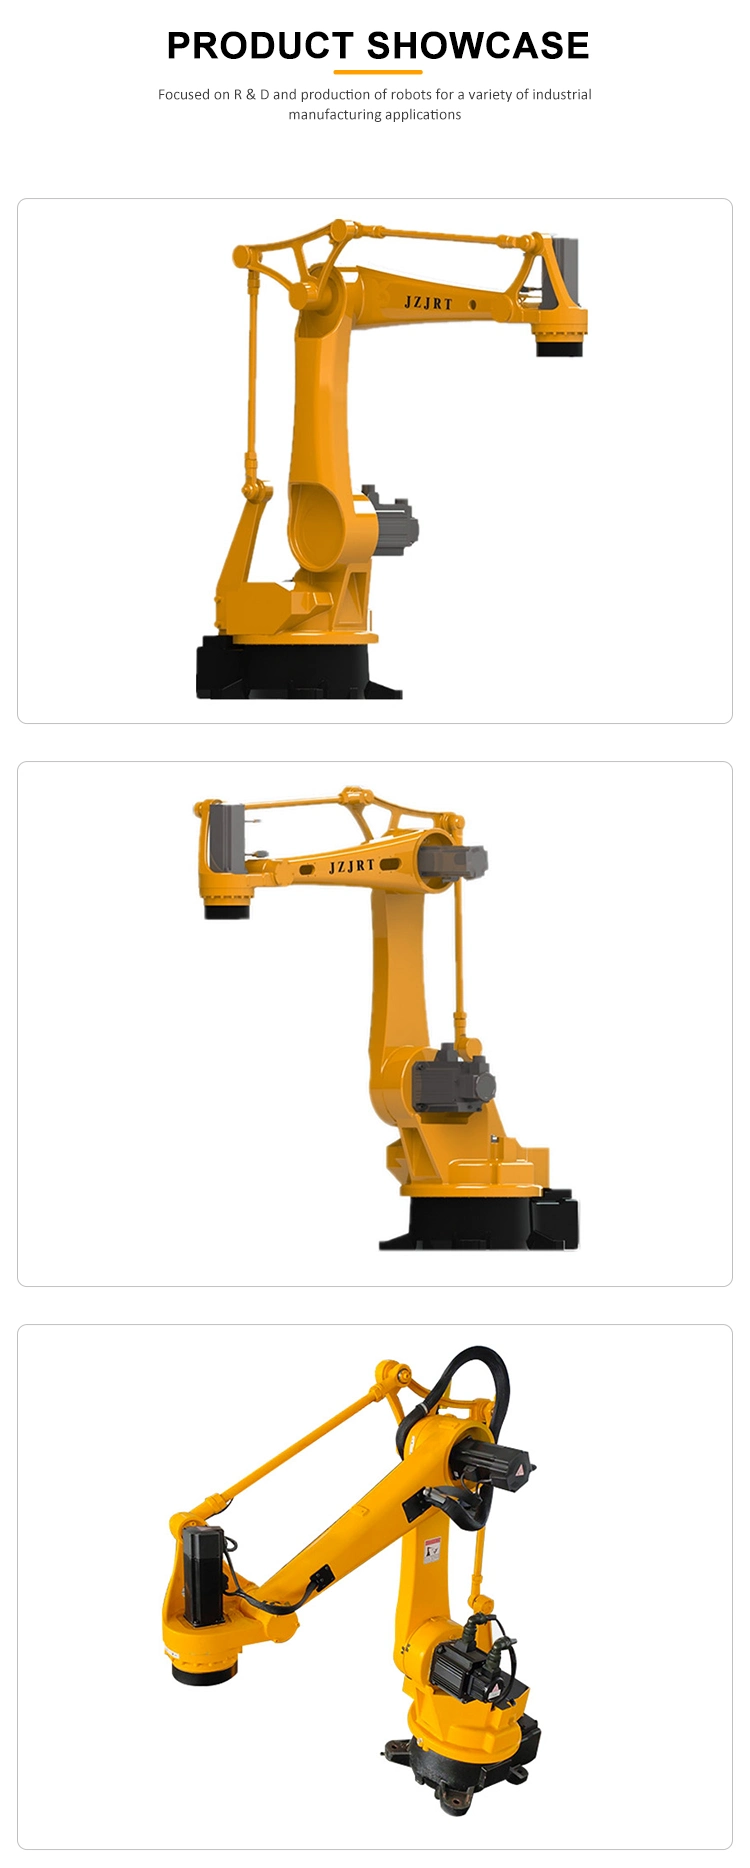 Multi Joint Robot 6 Dof Palletizer Polishing Painting Manipulator Arm Robot for Good Price with Low Price